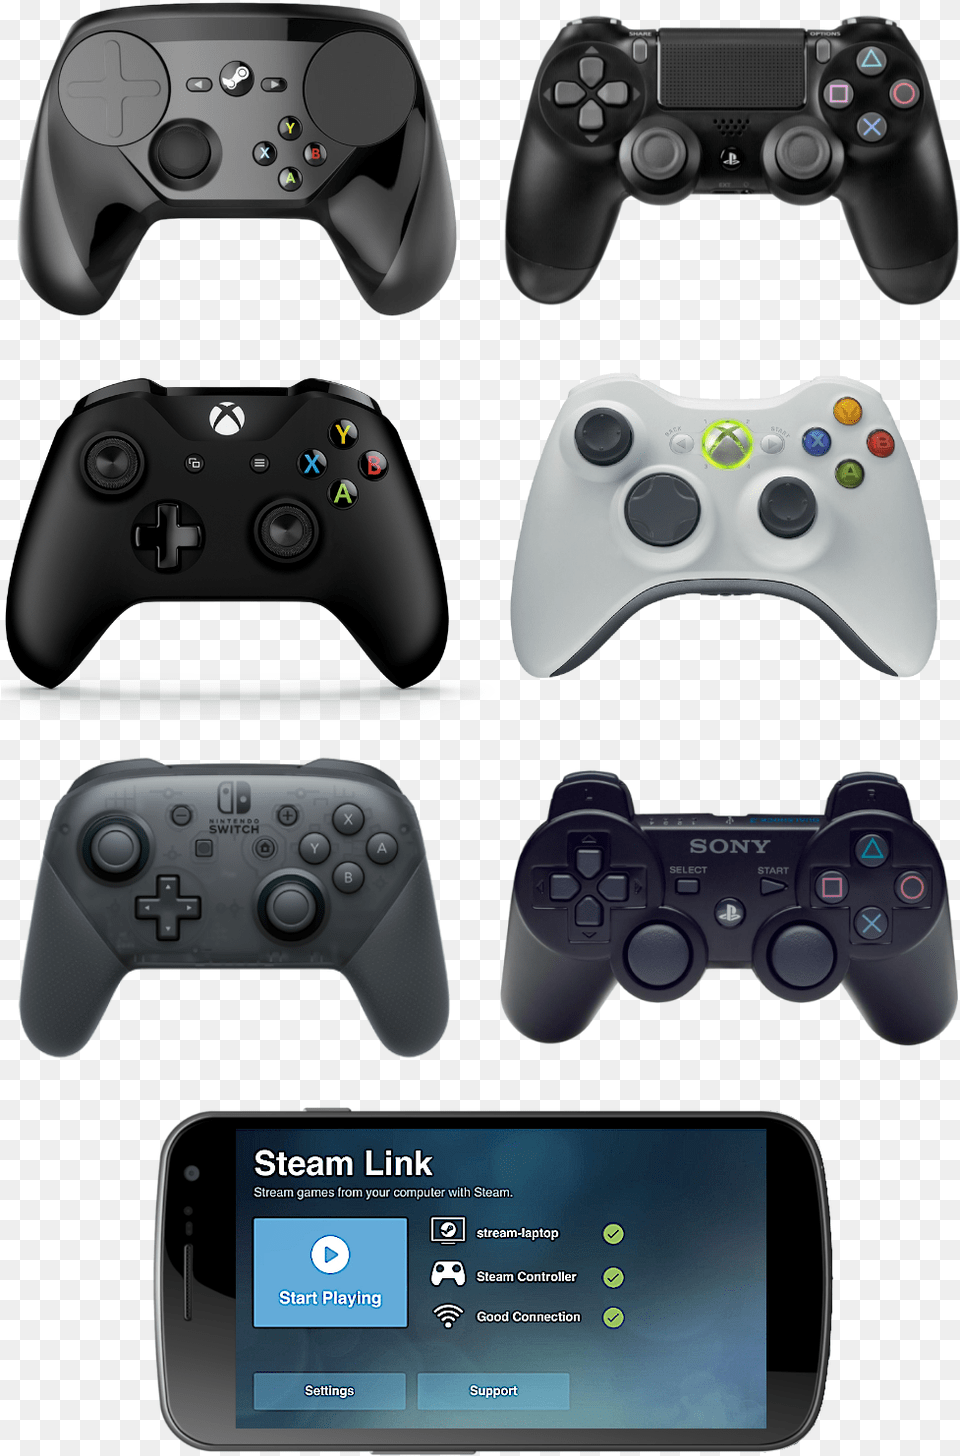 Xbox 360 Controller, Electronics, Camera, Remote Control, Mobile Phone Png Image